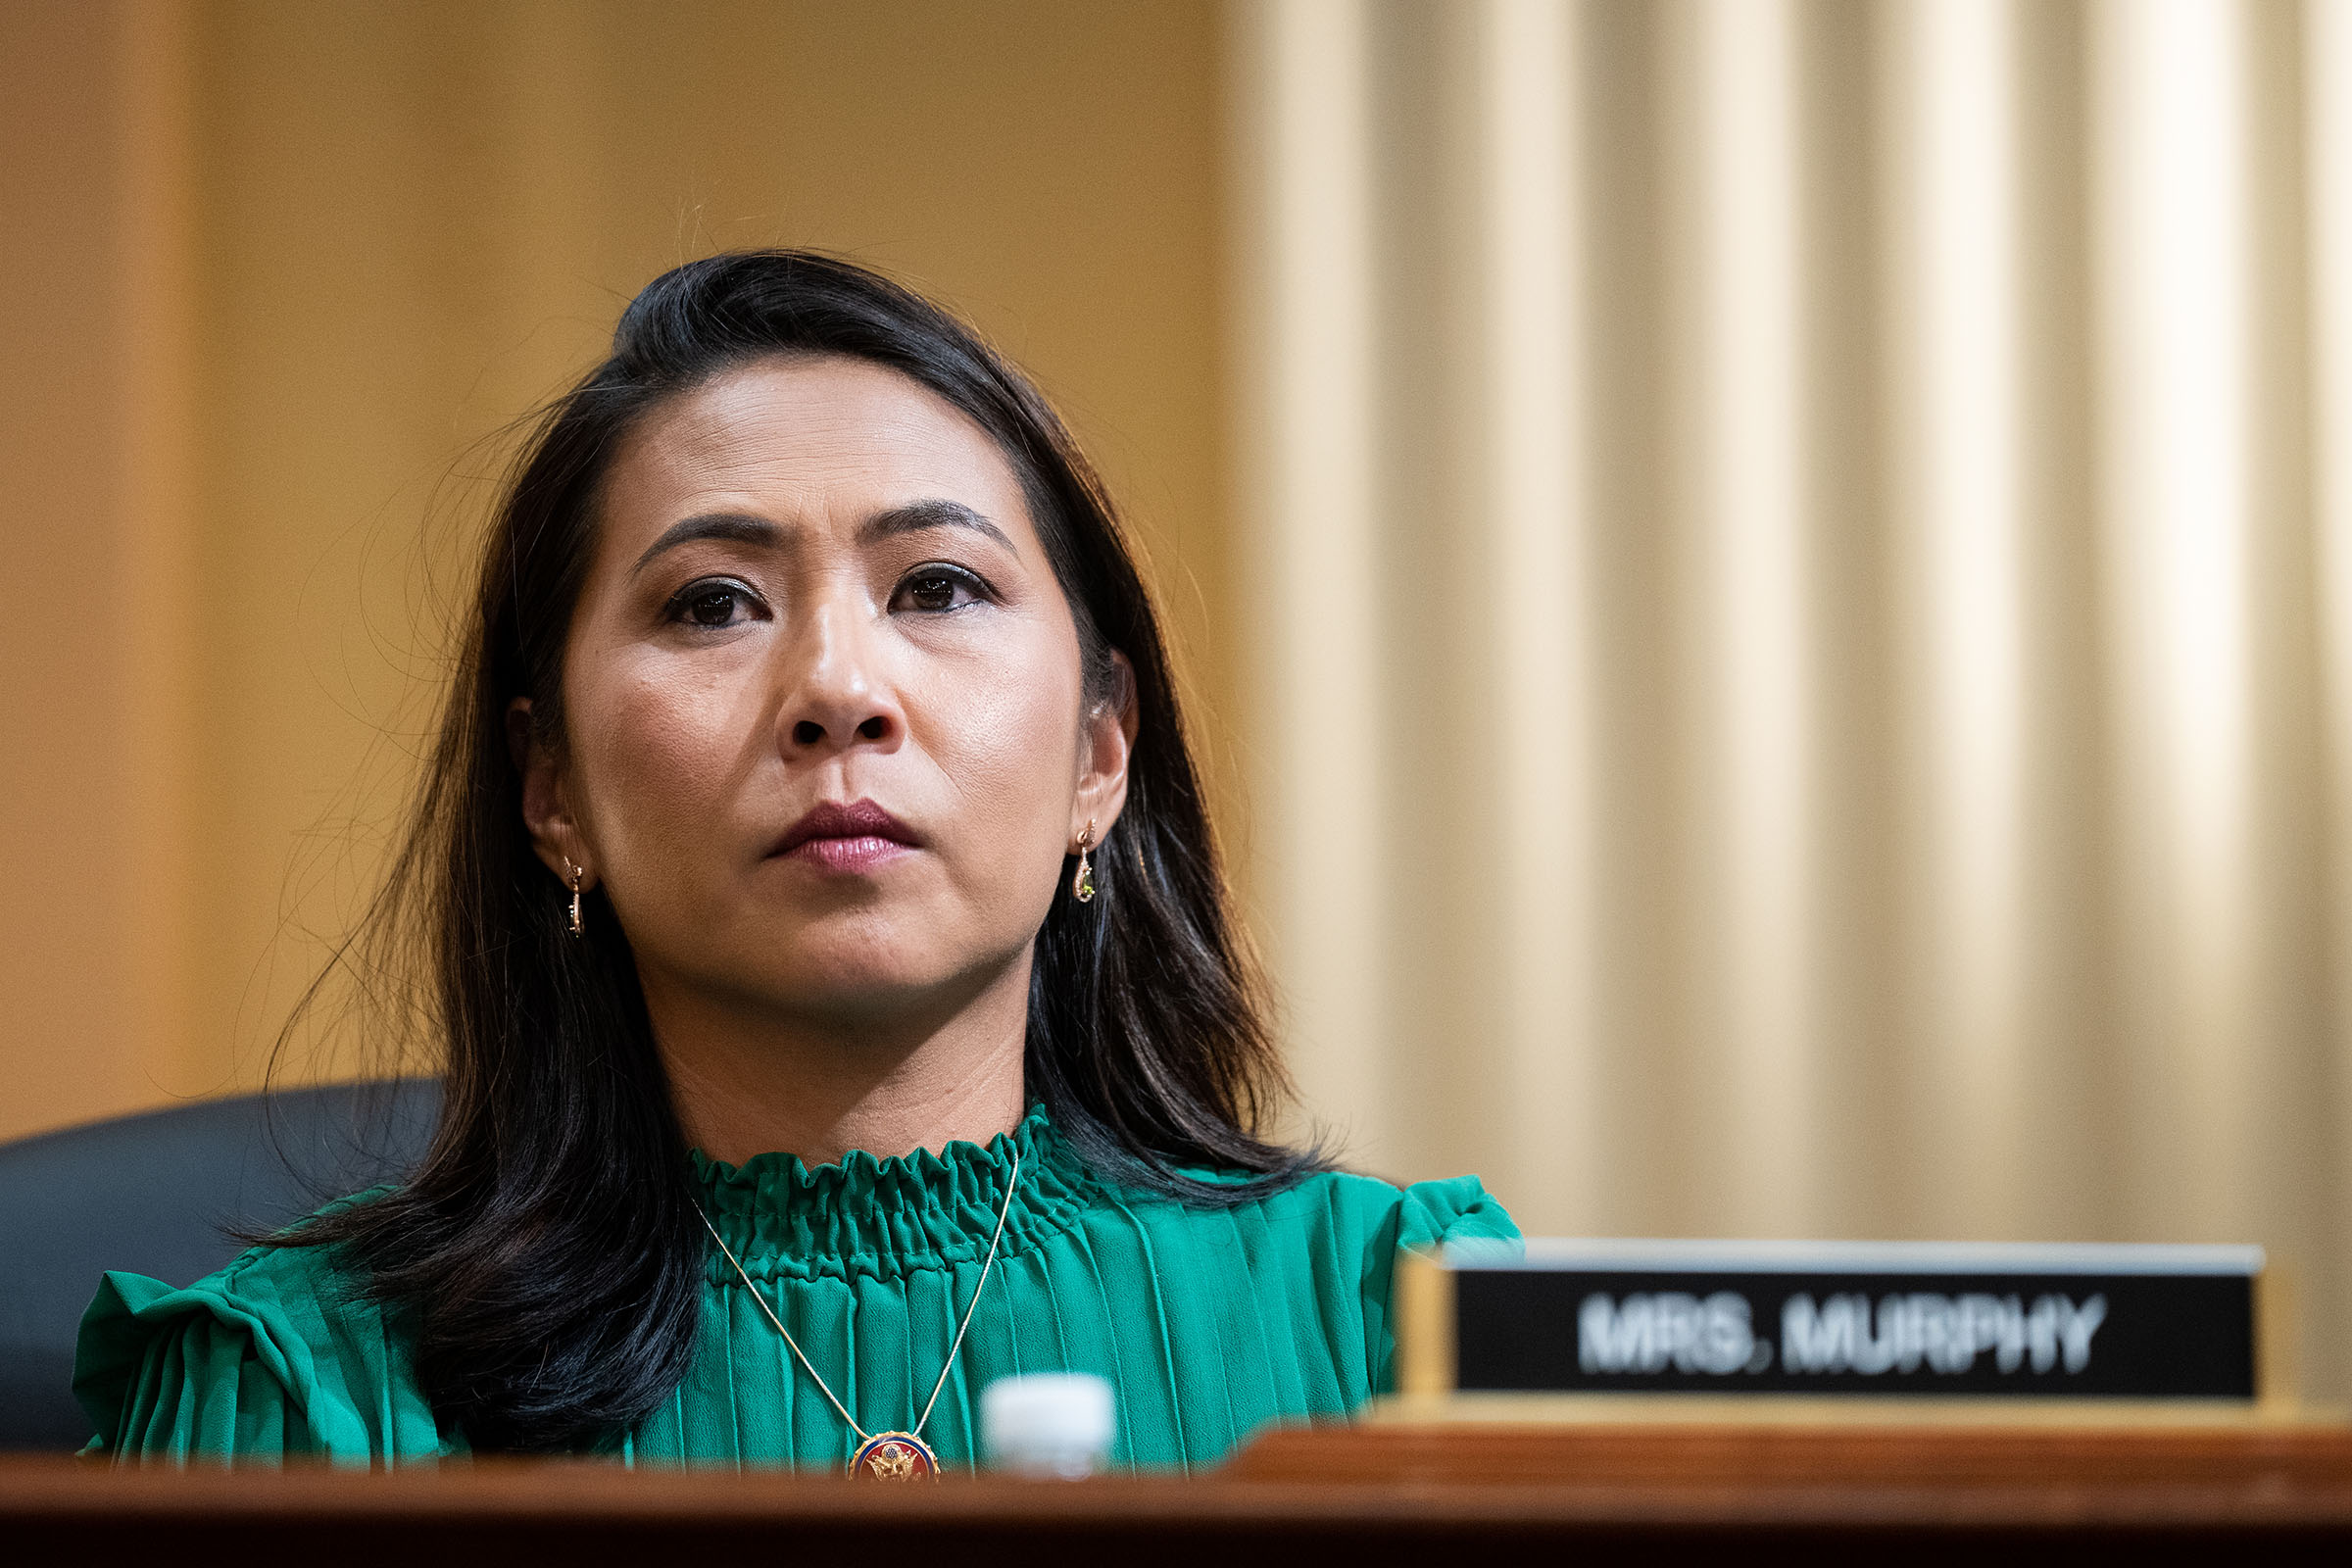 Rep. Stephanie Murphy, D-Fla., listens during the Select Committee to Investigate the January 6th Attack on the U.S. Capitol hearing in the Cannon House Office Building in Washington on Thursday, June 9, 2022. (Bill Clark—CQ-Roll Call/Getty Images)